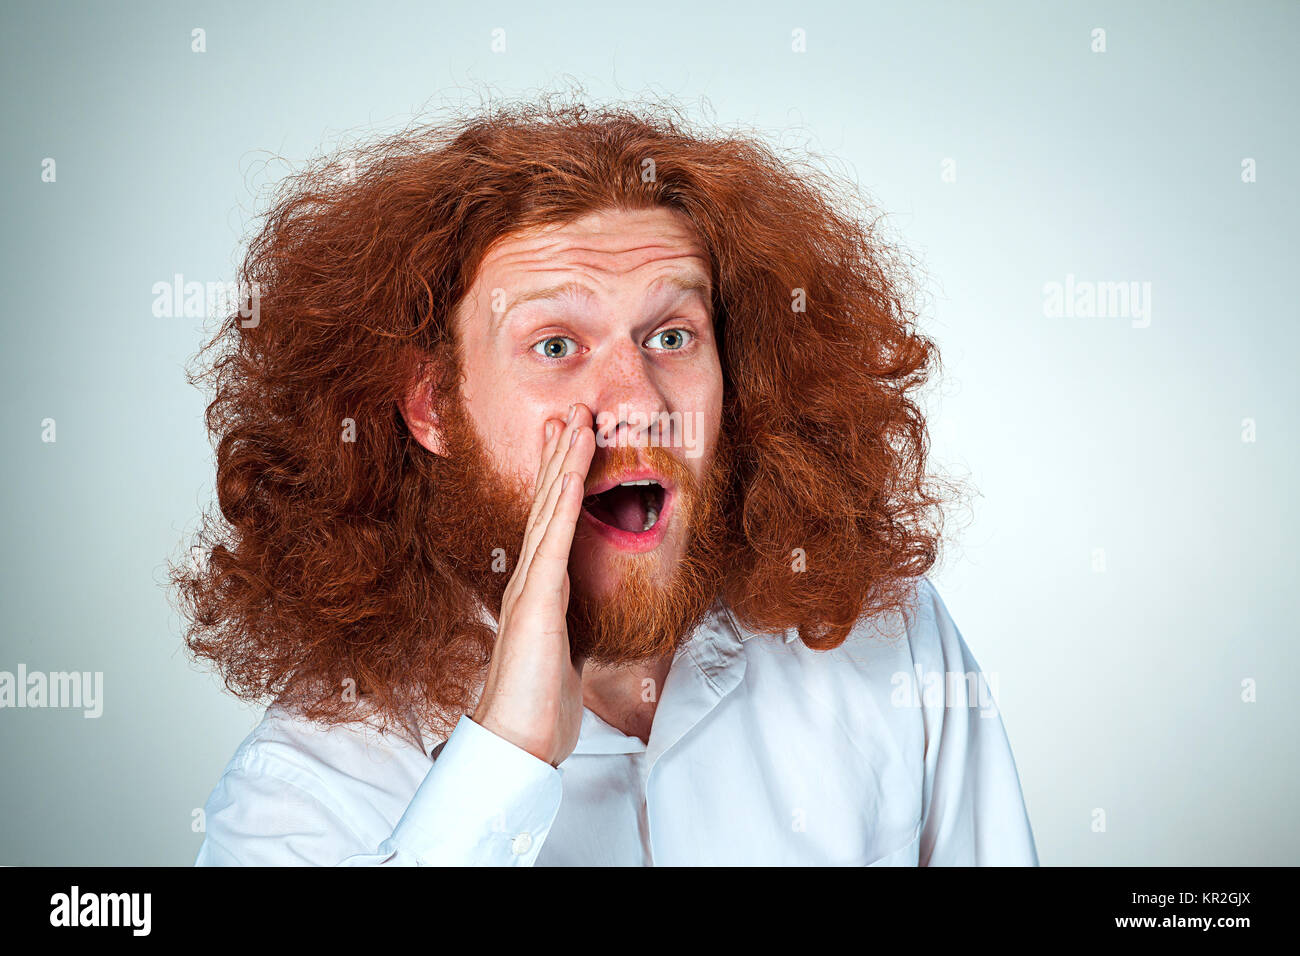 Portrait Of Screaming Young Man With Long Red Hair And Shocked